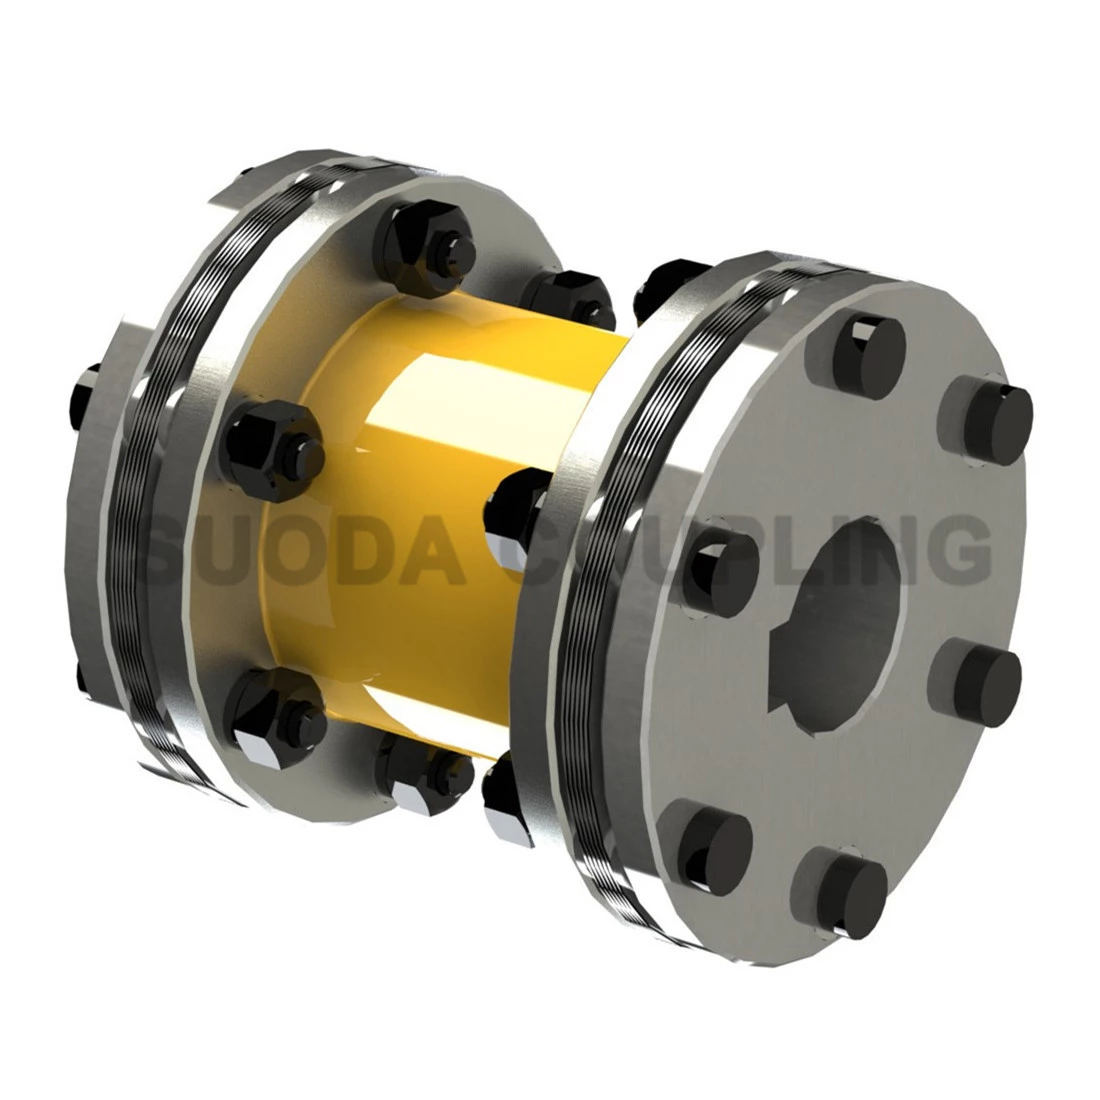 Usage and Maintenance of Disc Couplings